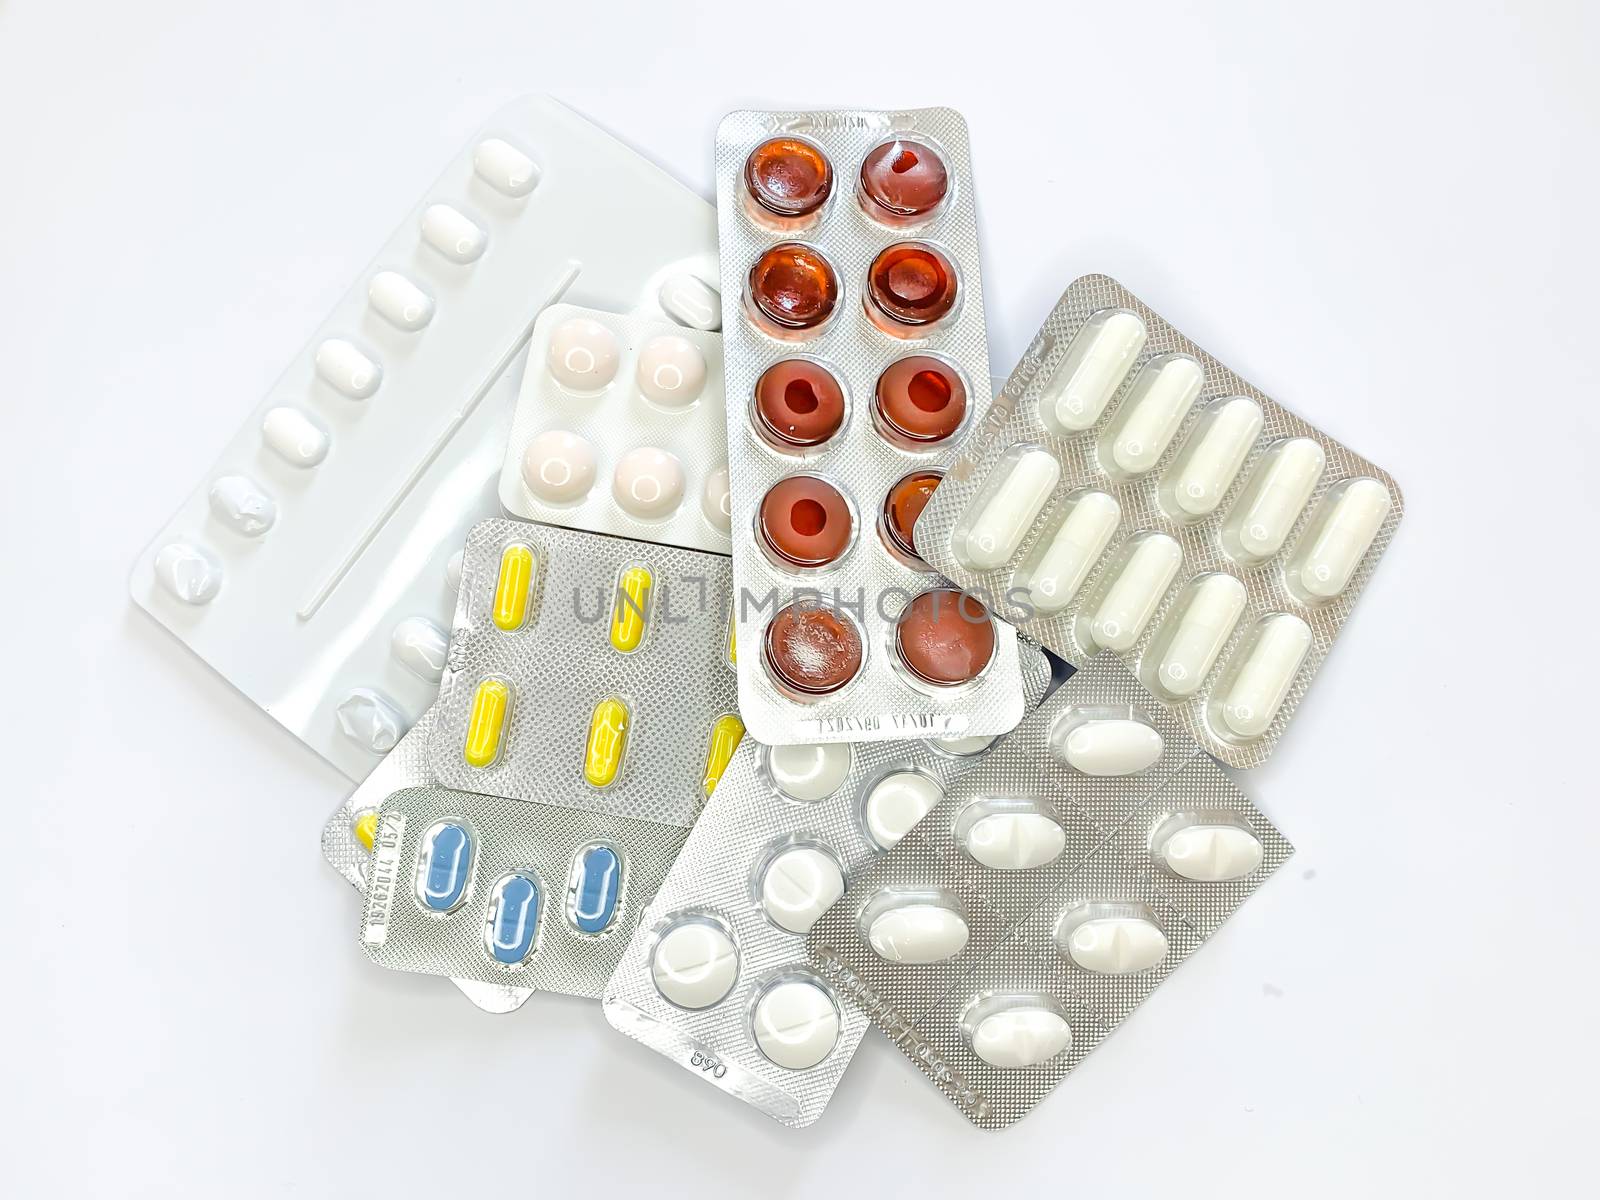 Many plenty a lot of tablets in blister pack, pills, capsules on a white background. Horizontal image